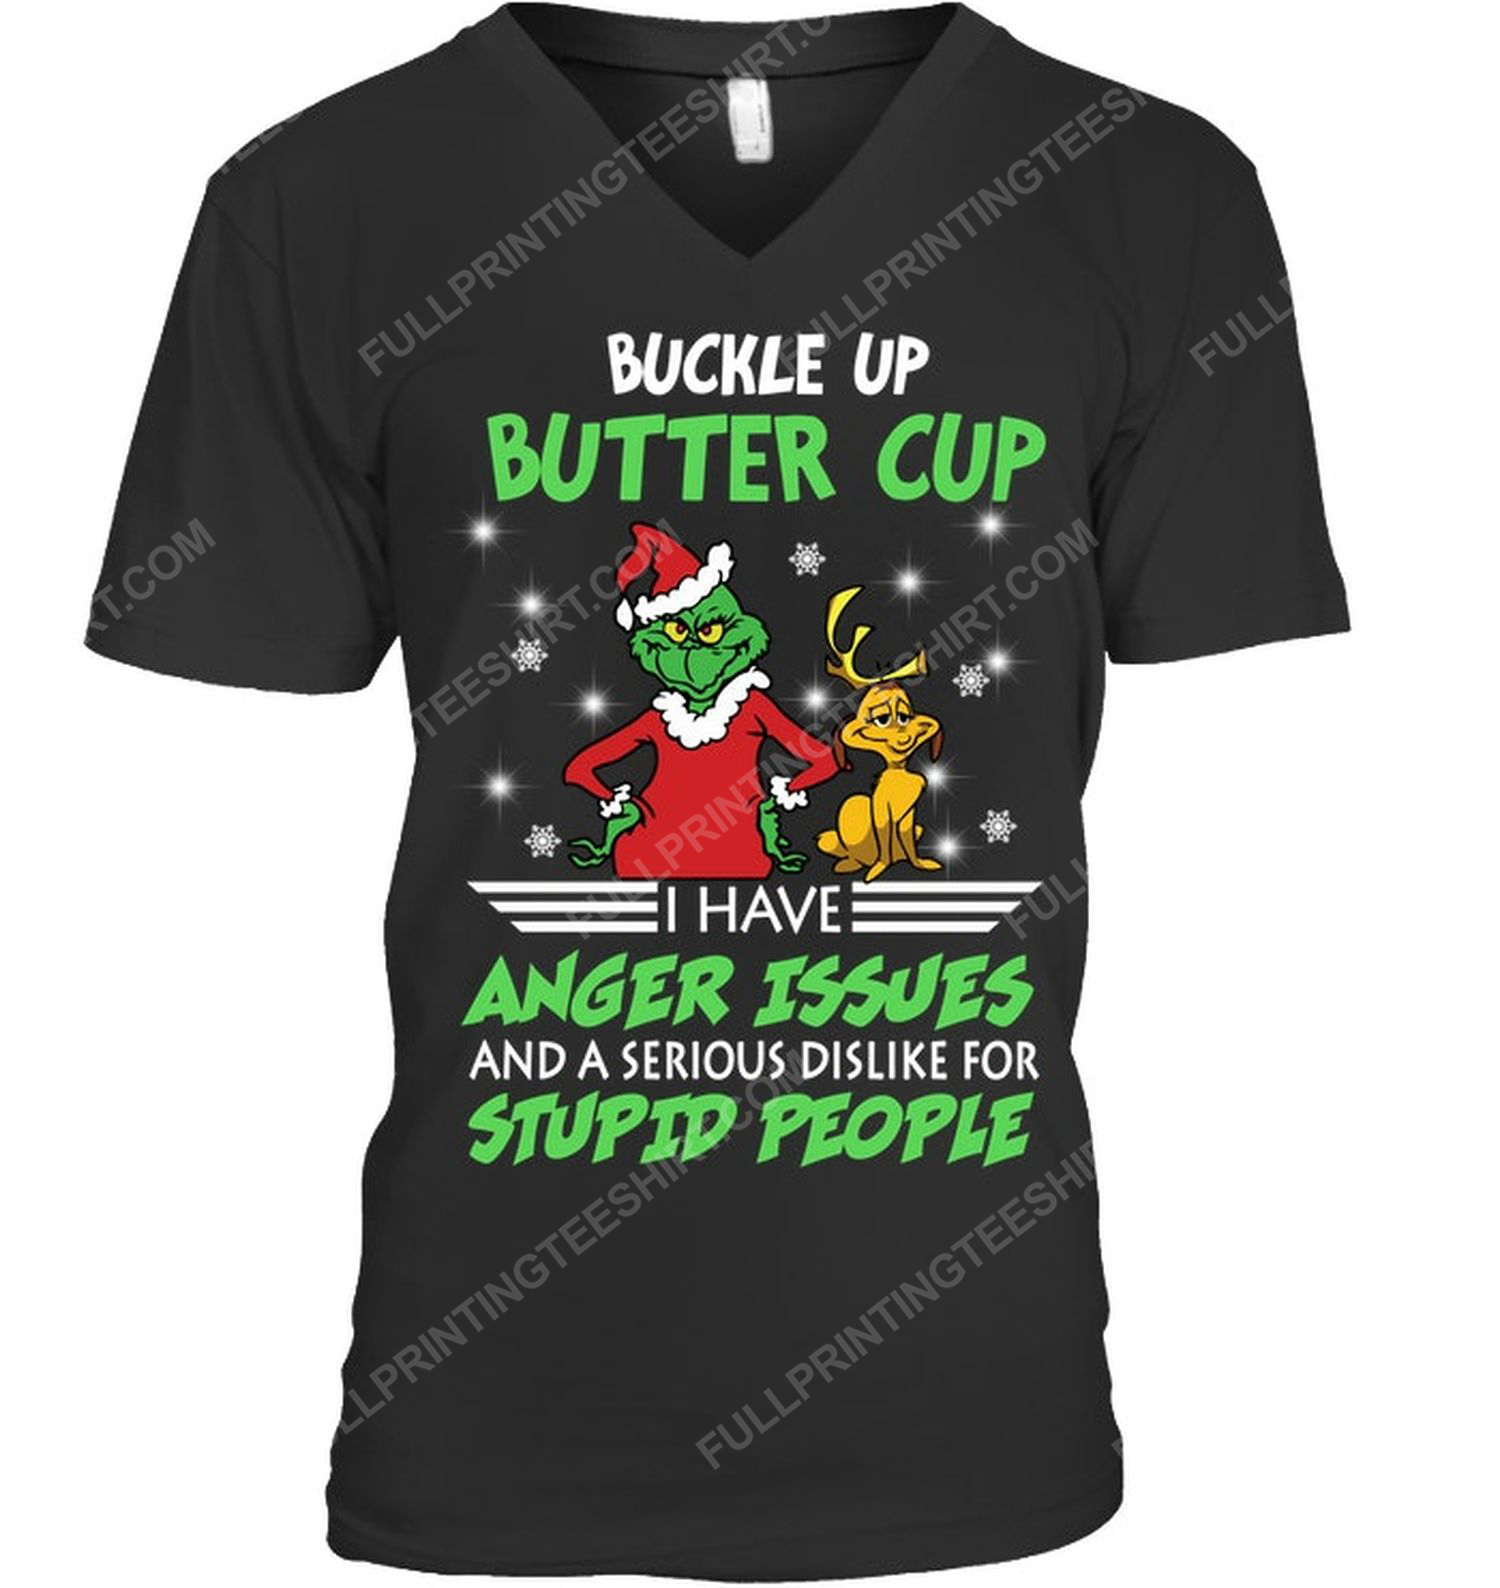 The grinch buckle the grinch up buttercup i have anger issues and a serious dislike for stupid people v-neck